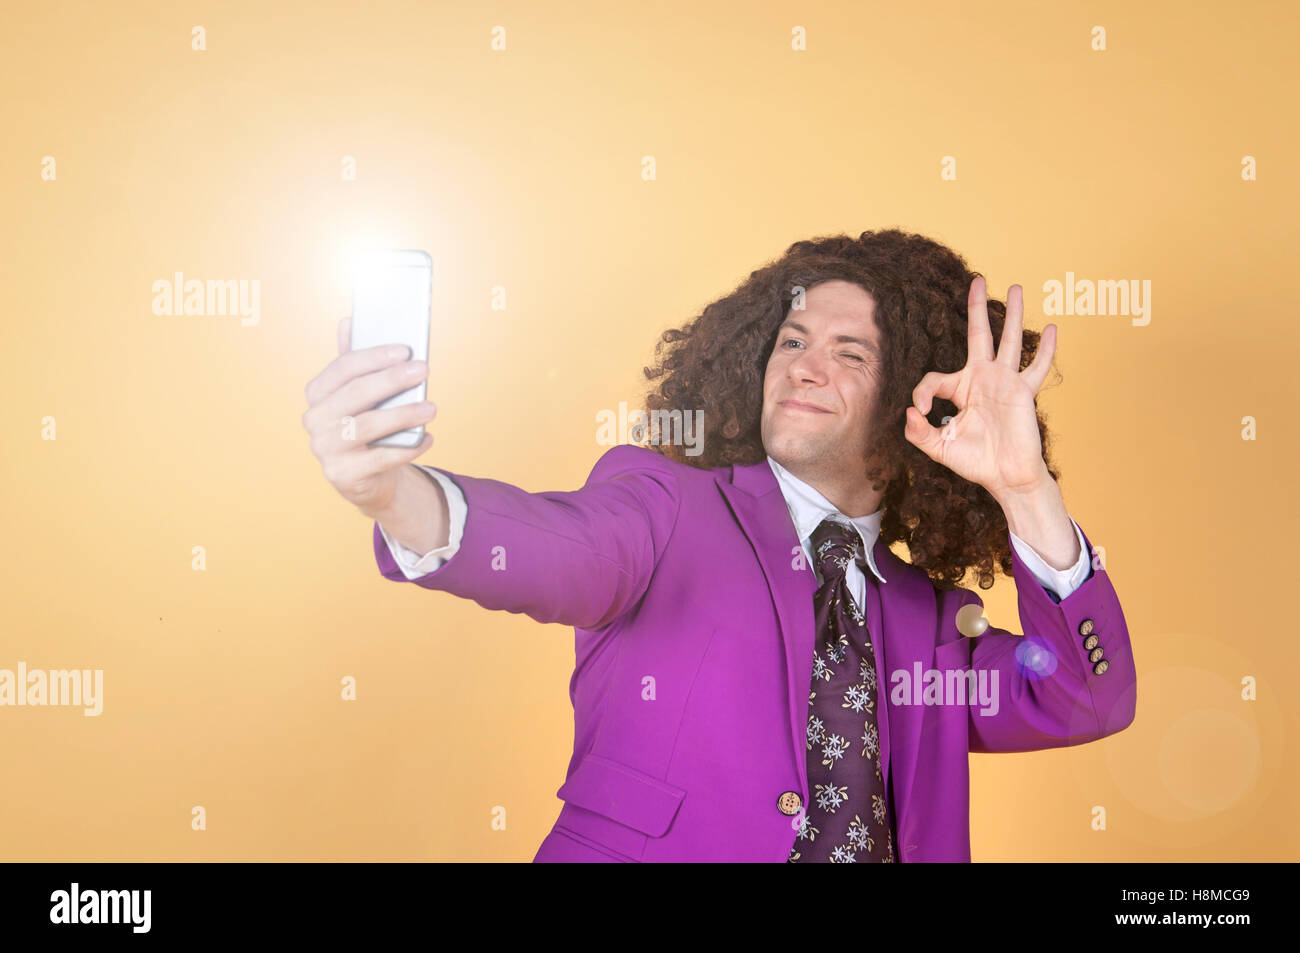 Caucasian man with afro wearing Purple Suit taking a selfie Stock Photo